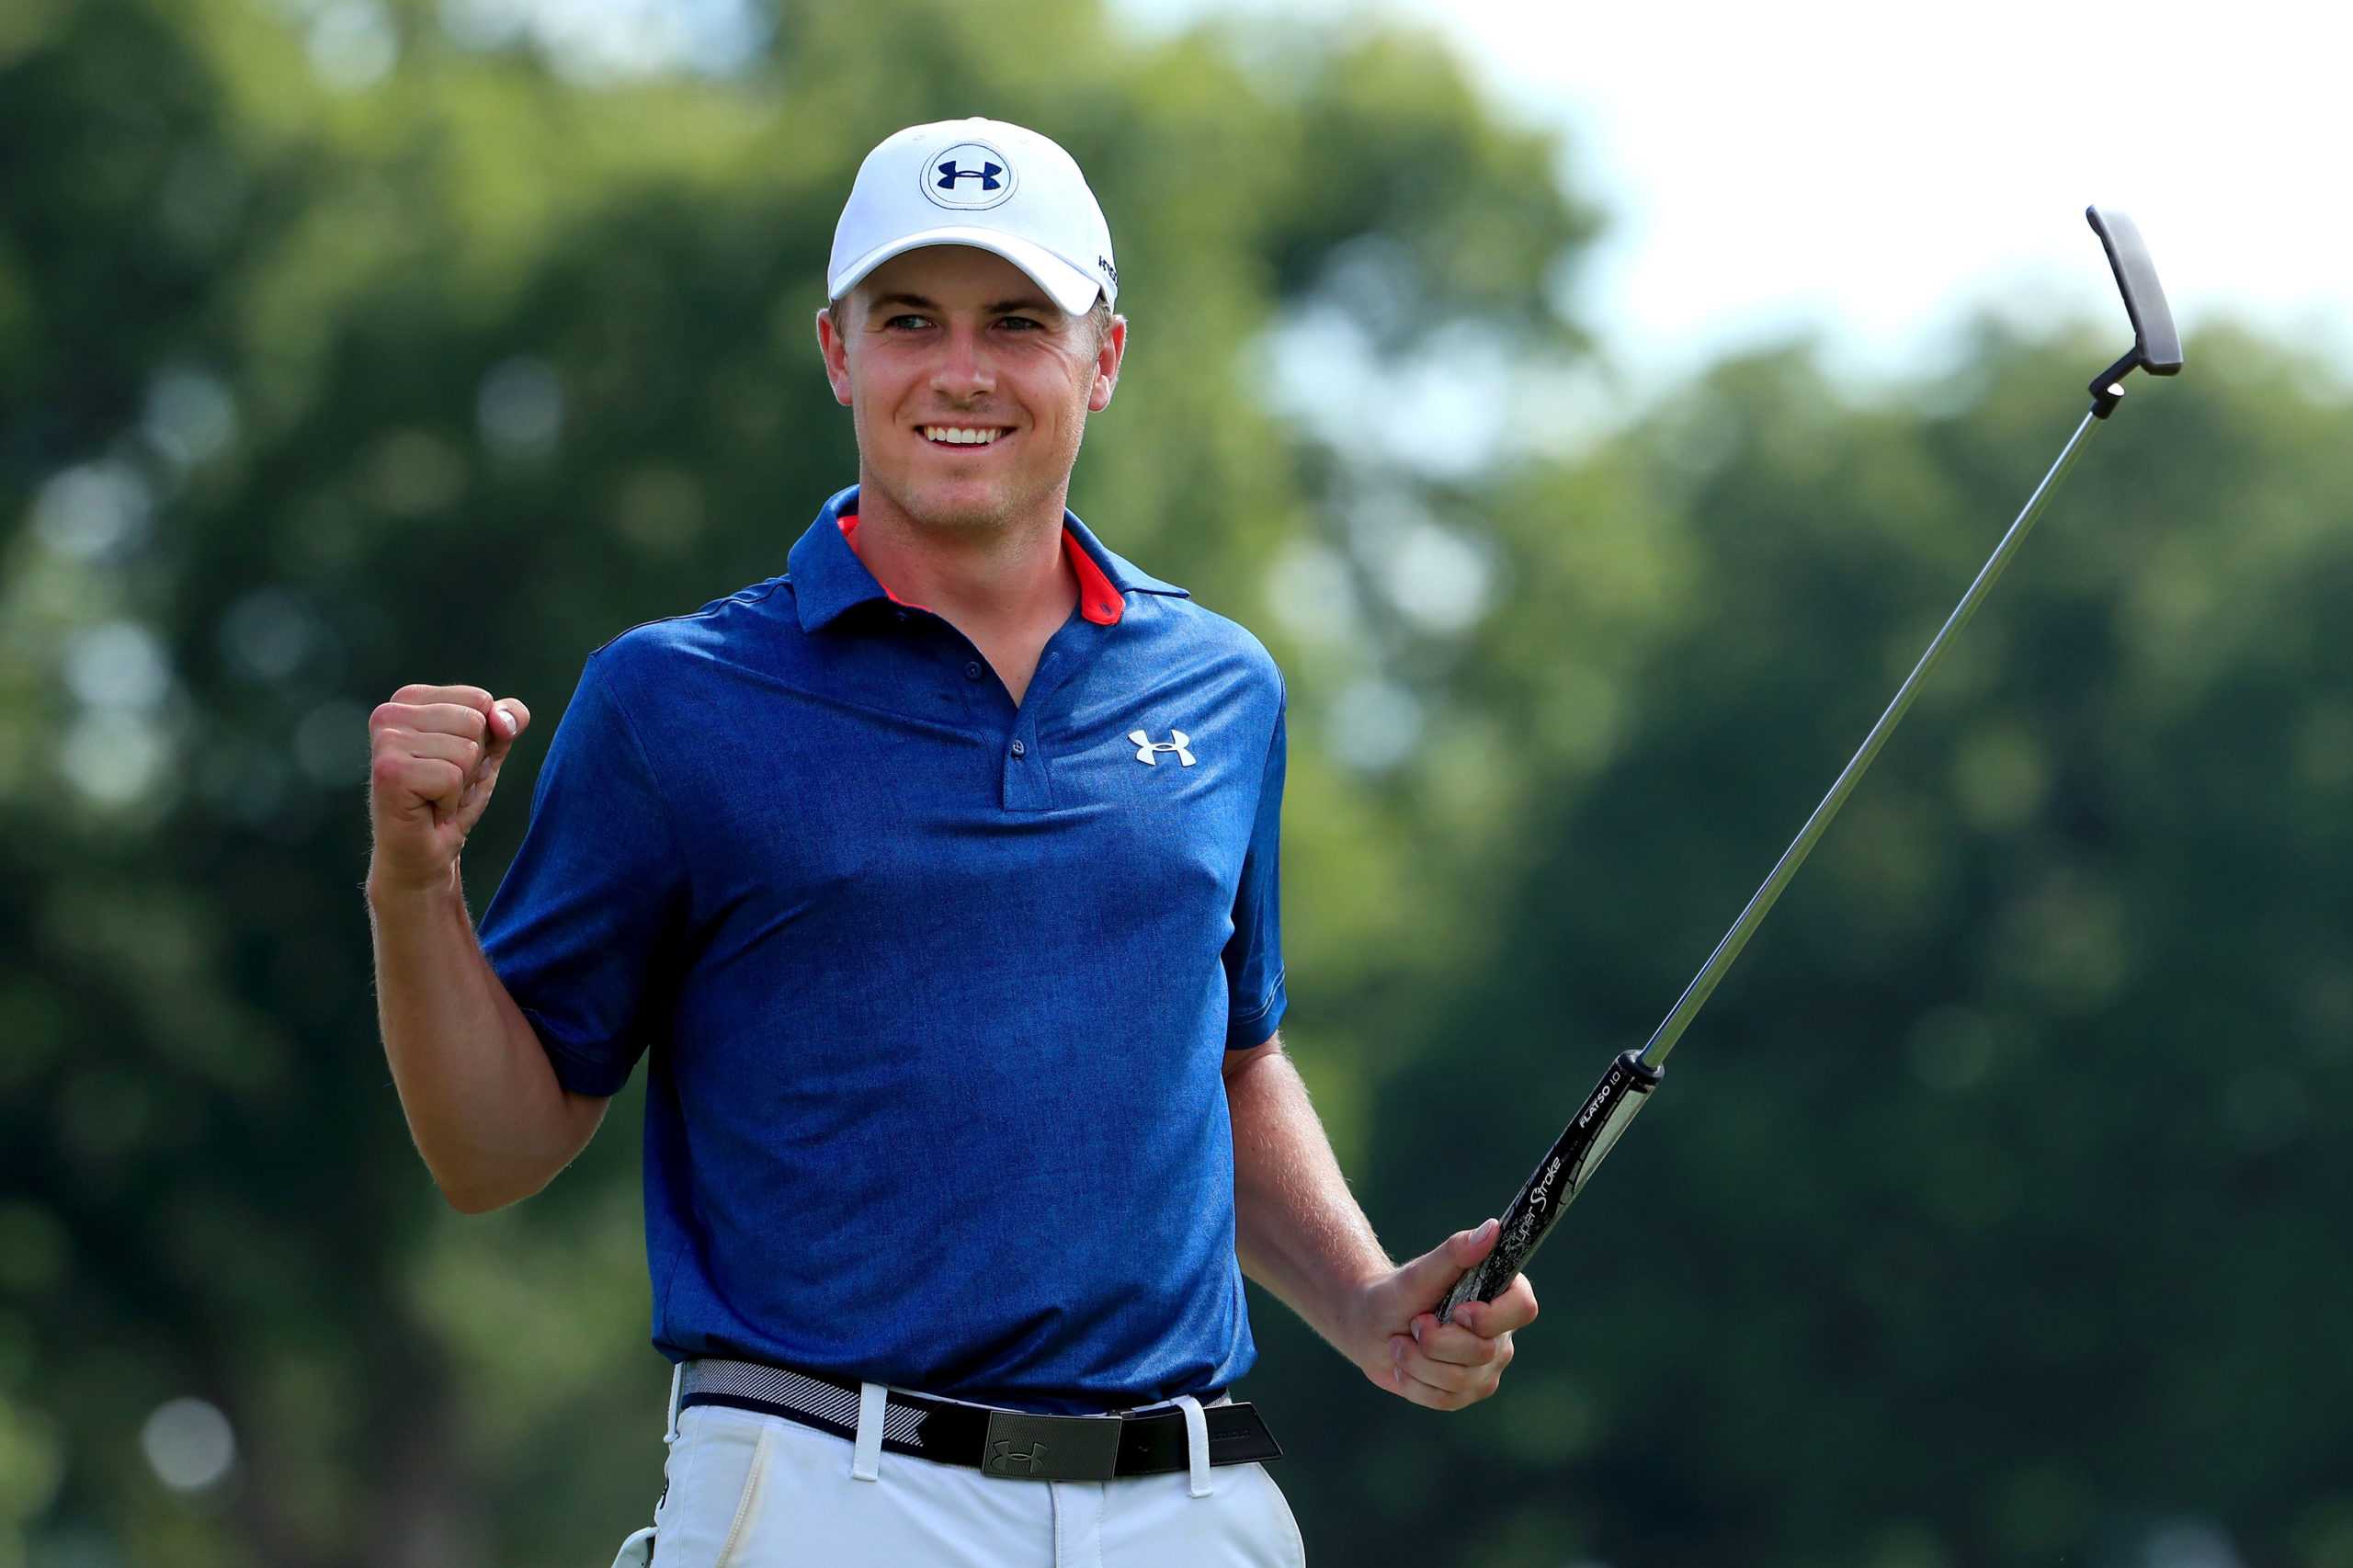  Jordan Spieth and His Final Round Woes